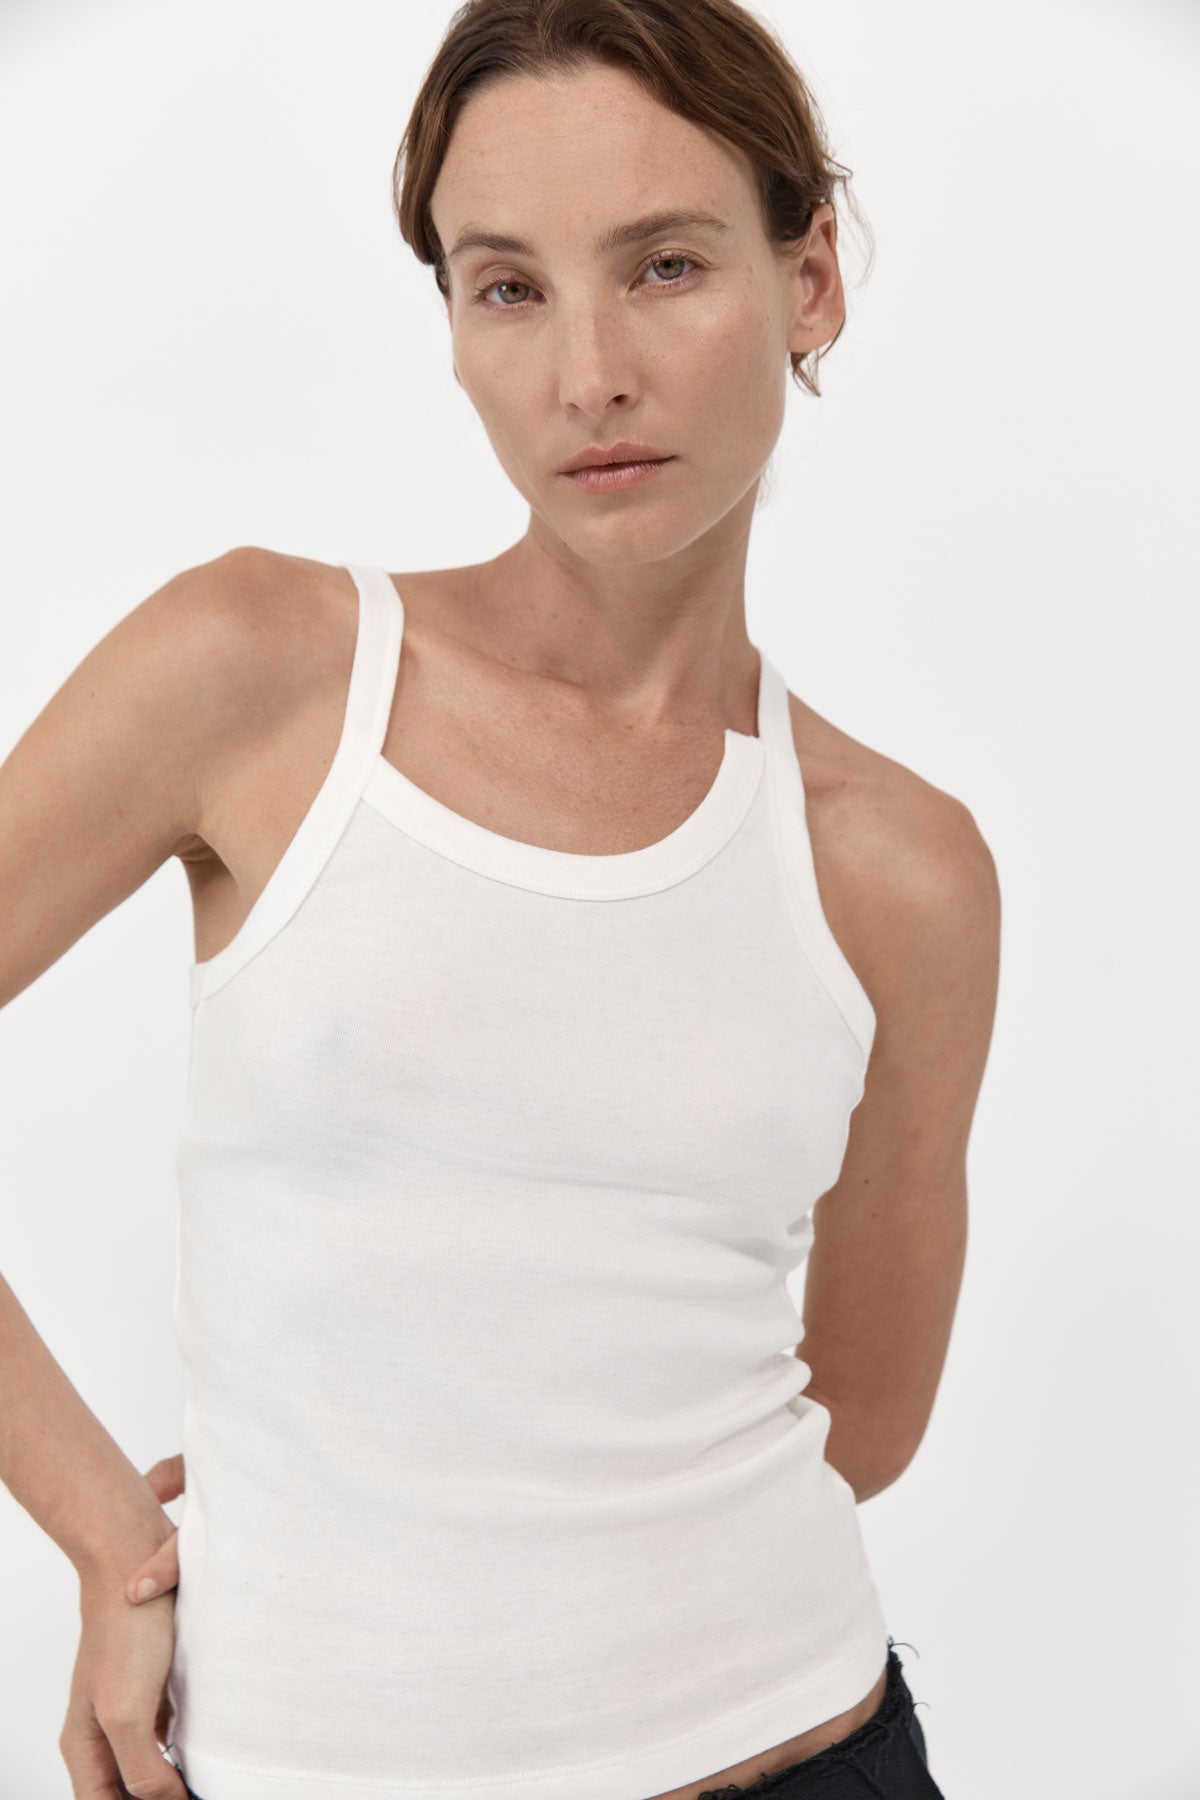 St Agni Organic Cotton Abstract Singlet in White available at TNT The New Trend Australia